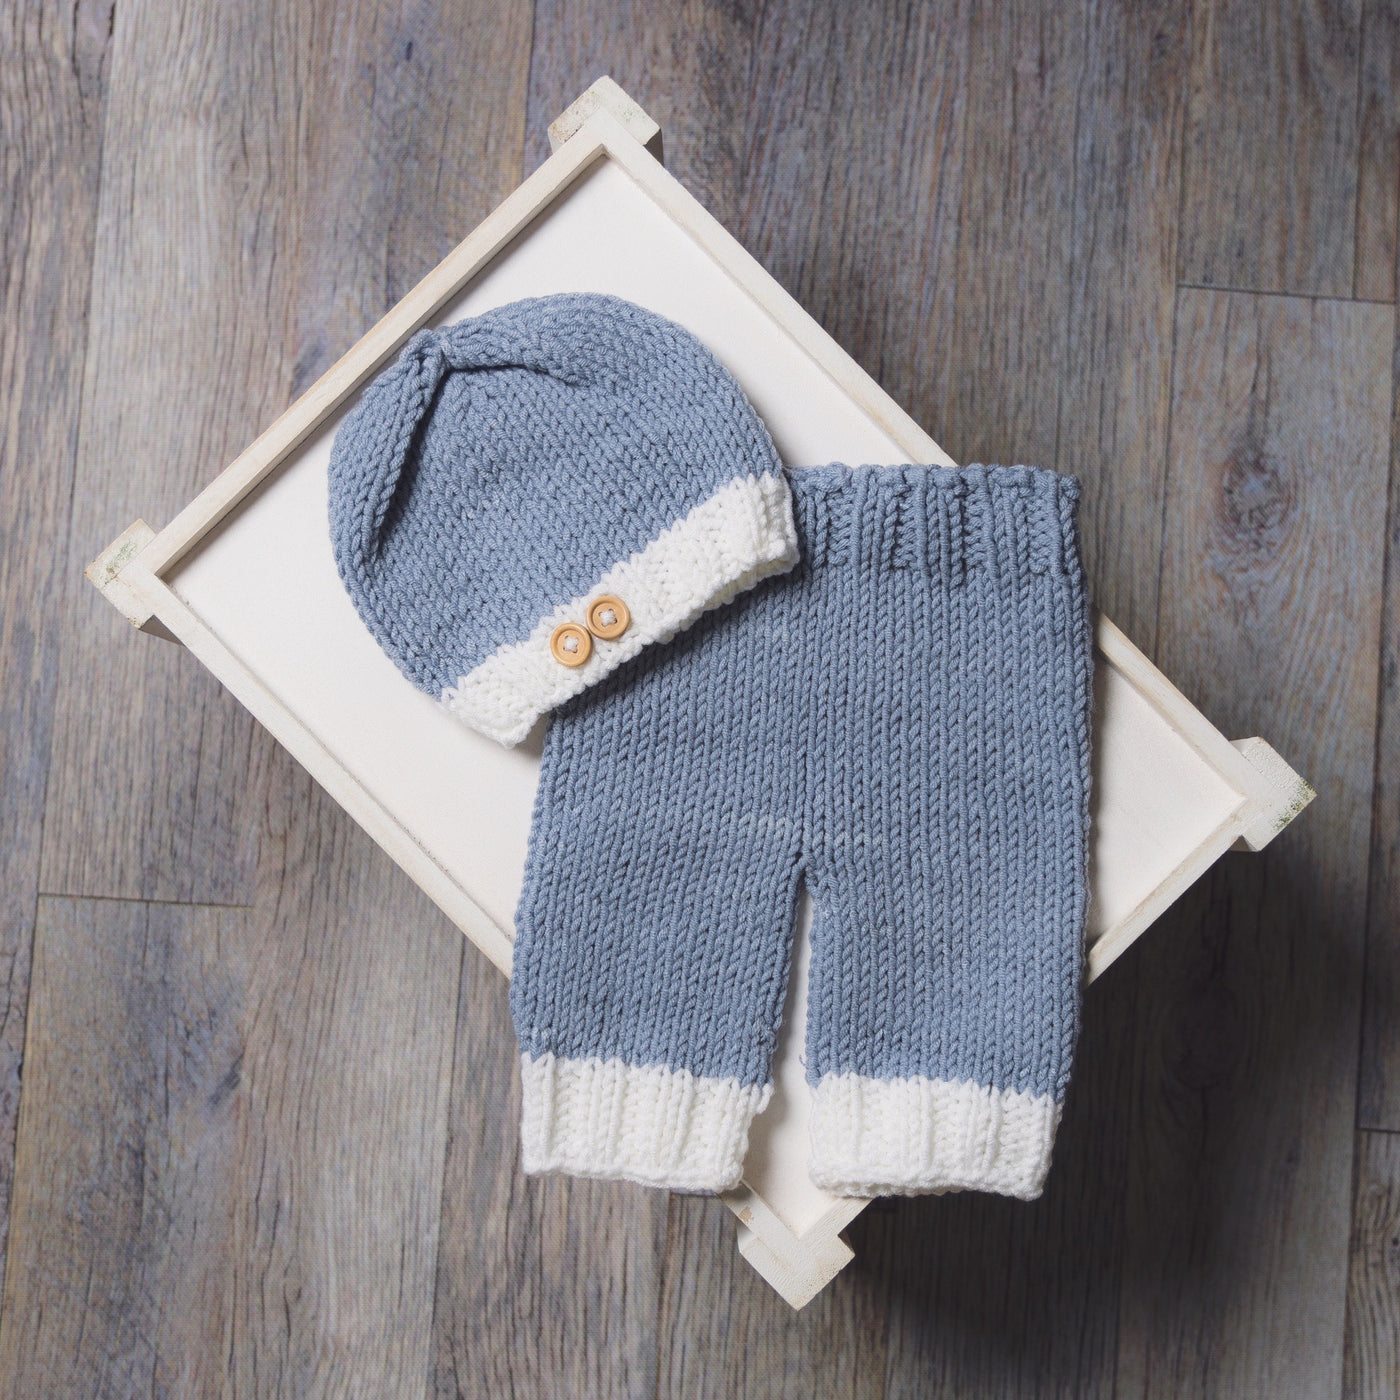 Blue and White Knit Newborn Button Hat and Pants Set - Beautiful Photo Props